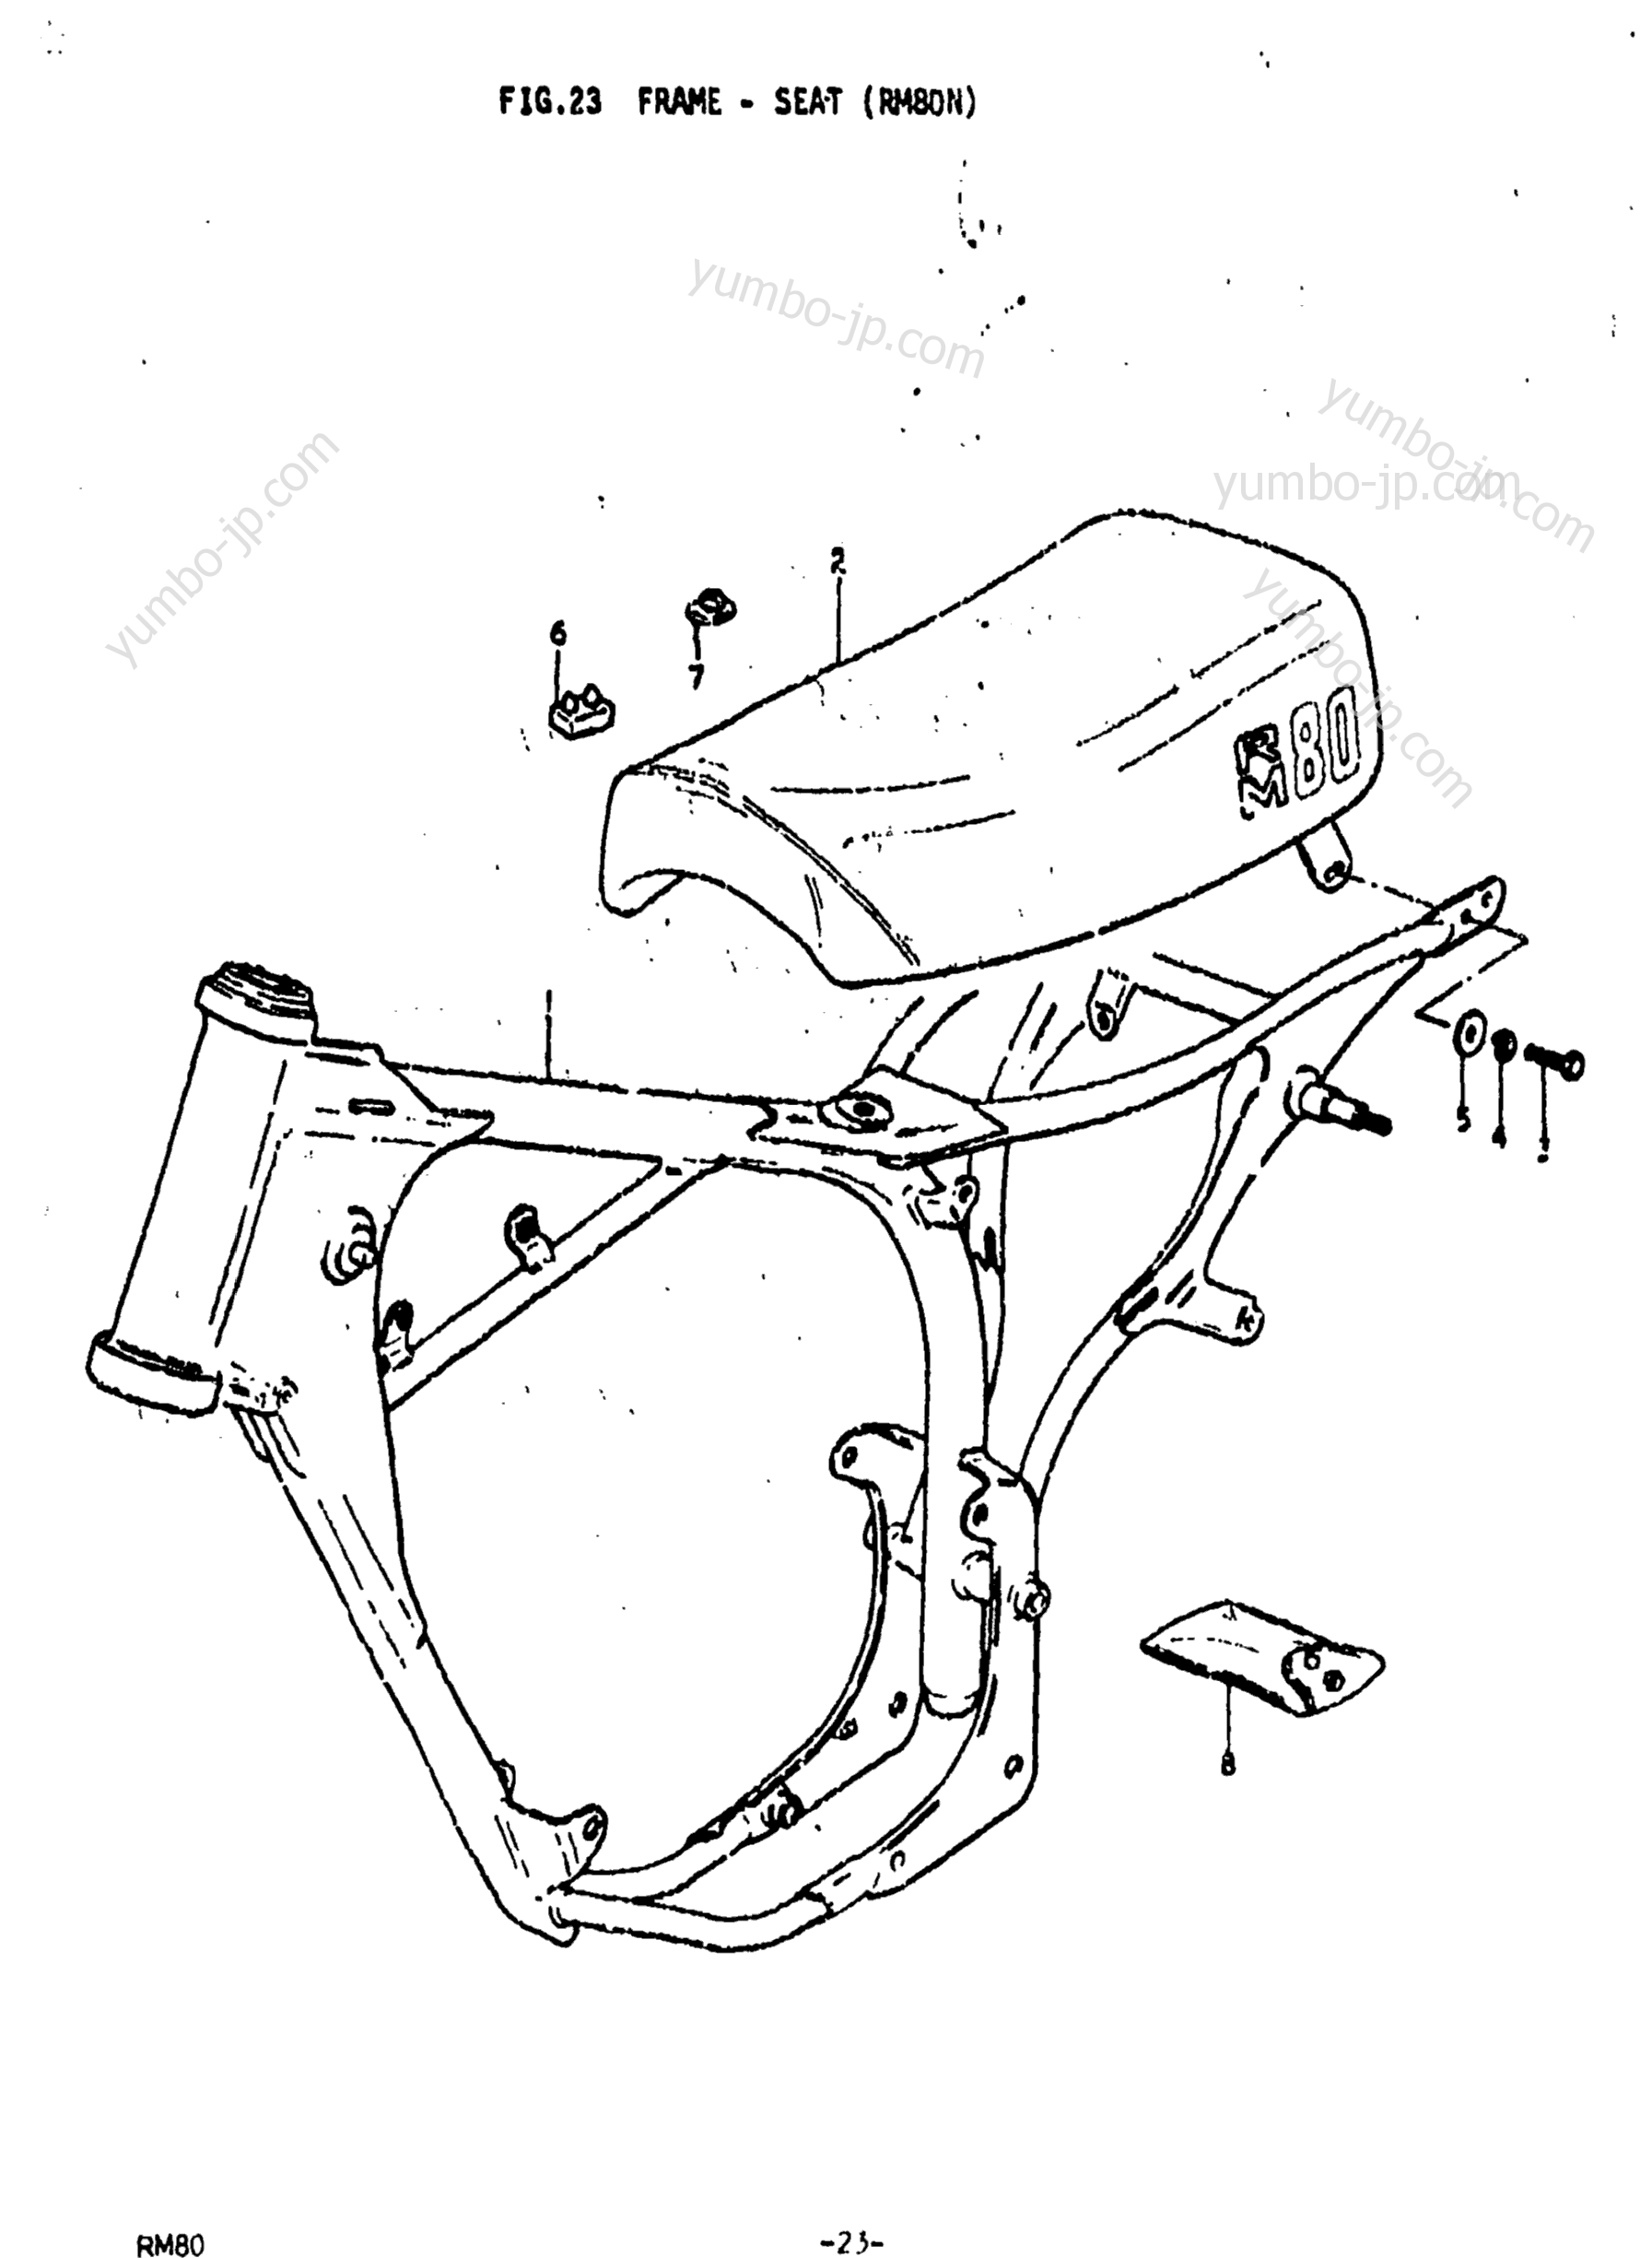 FRAME - SEAT (RM80N) for motorcycles SUZUKI RM80 1977 year